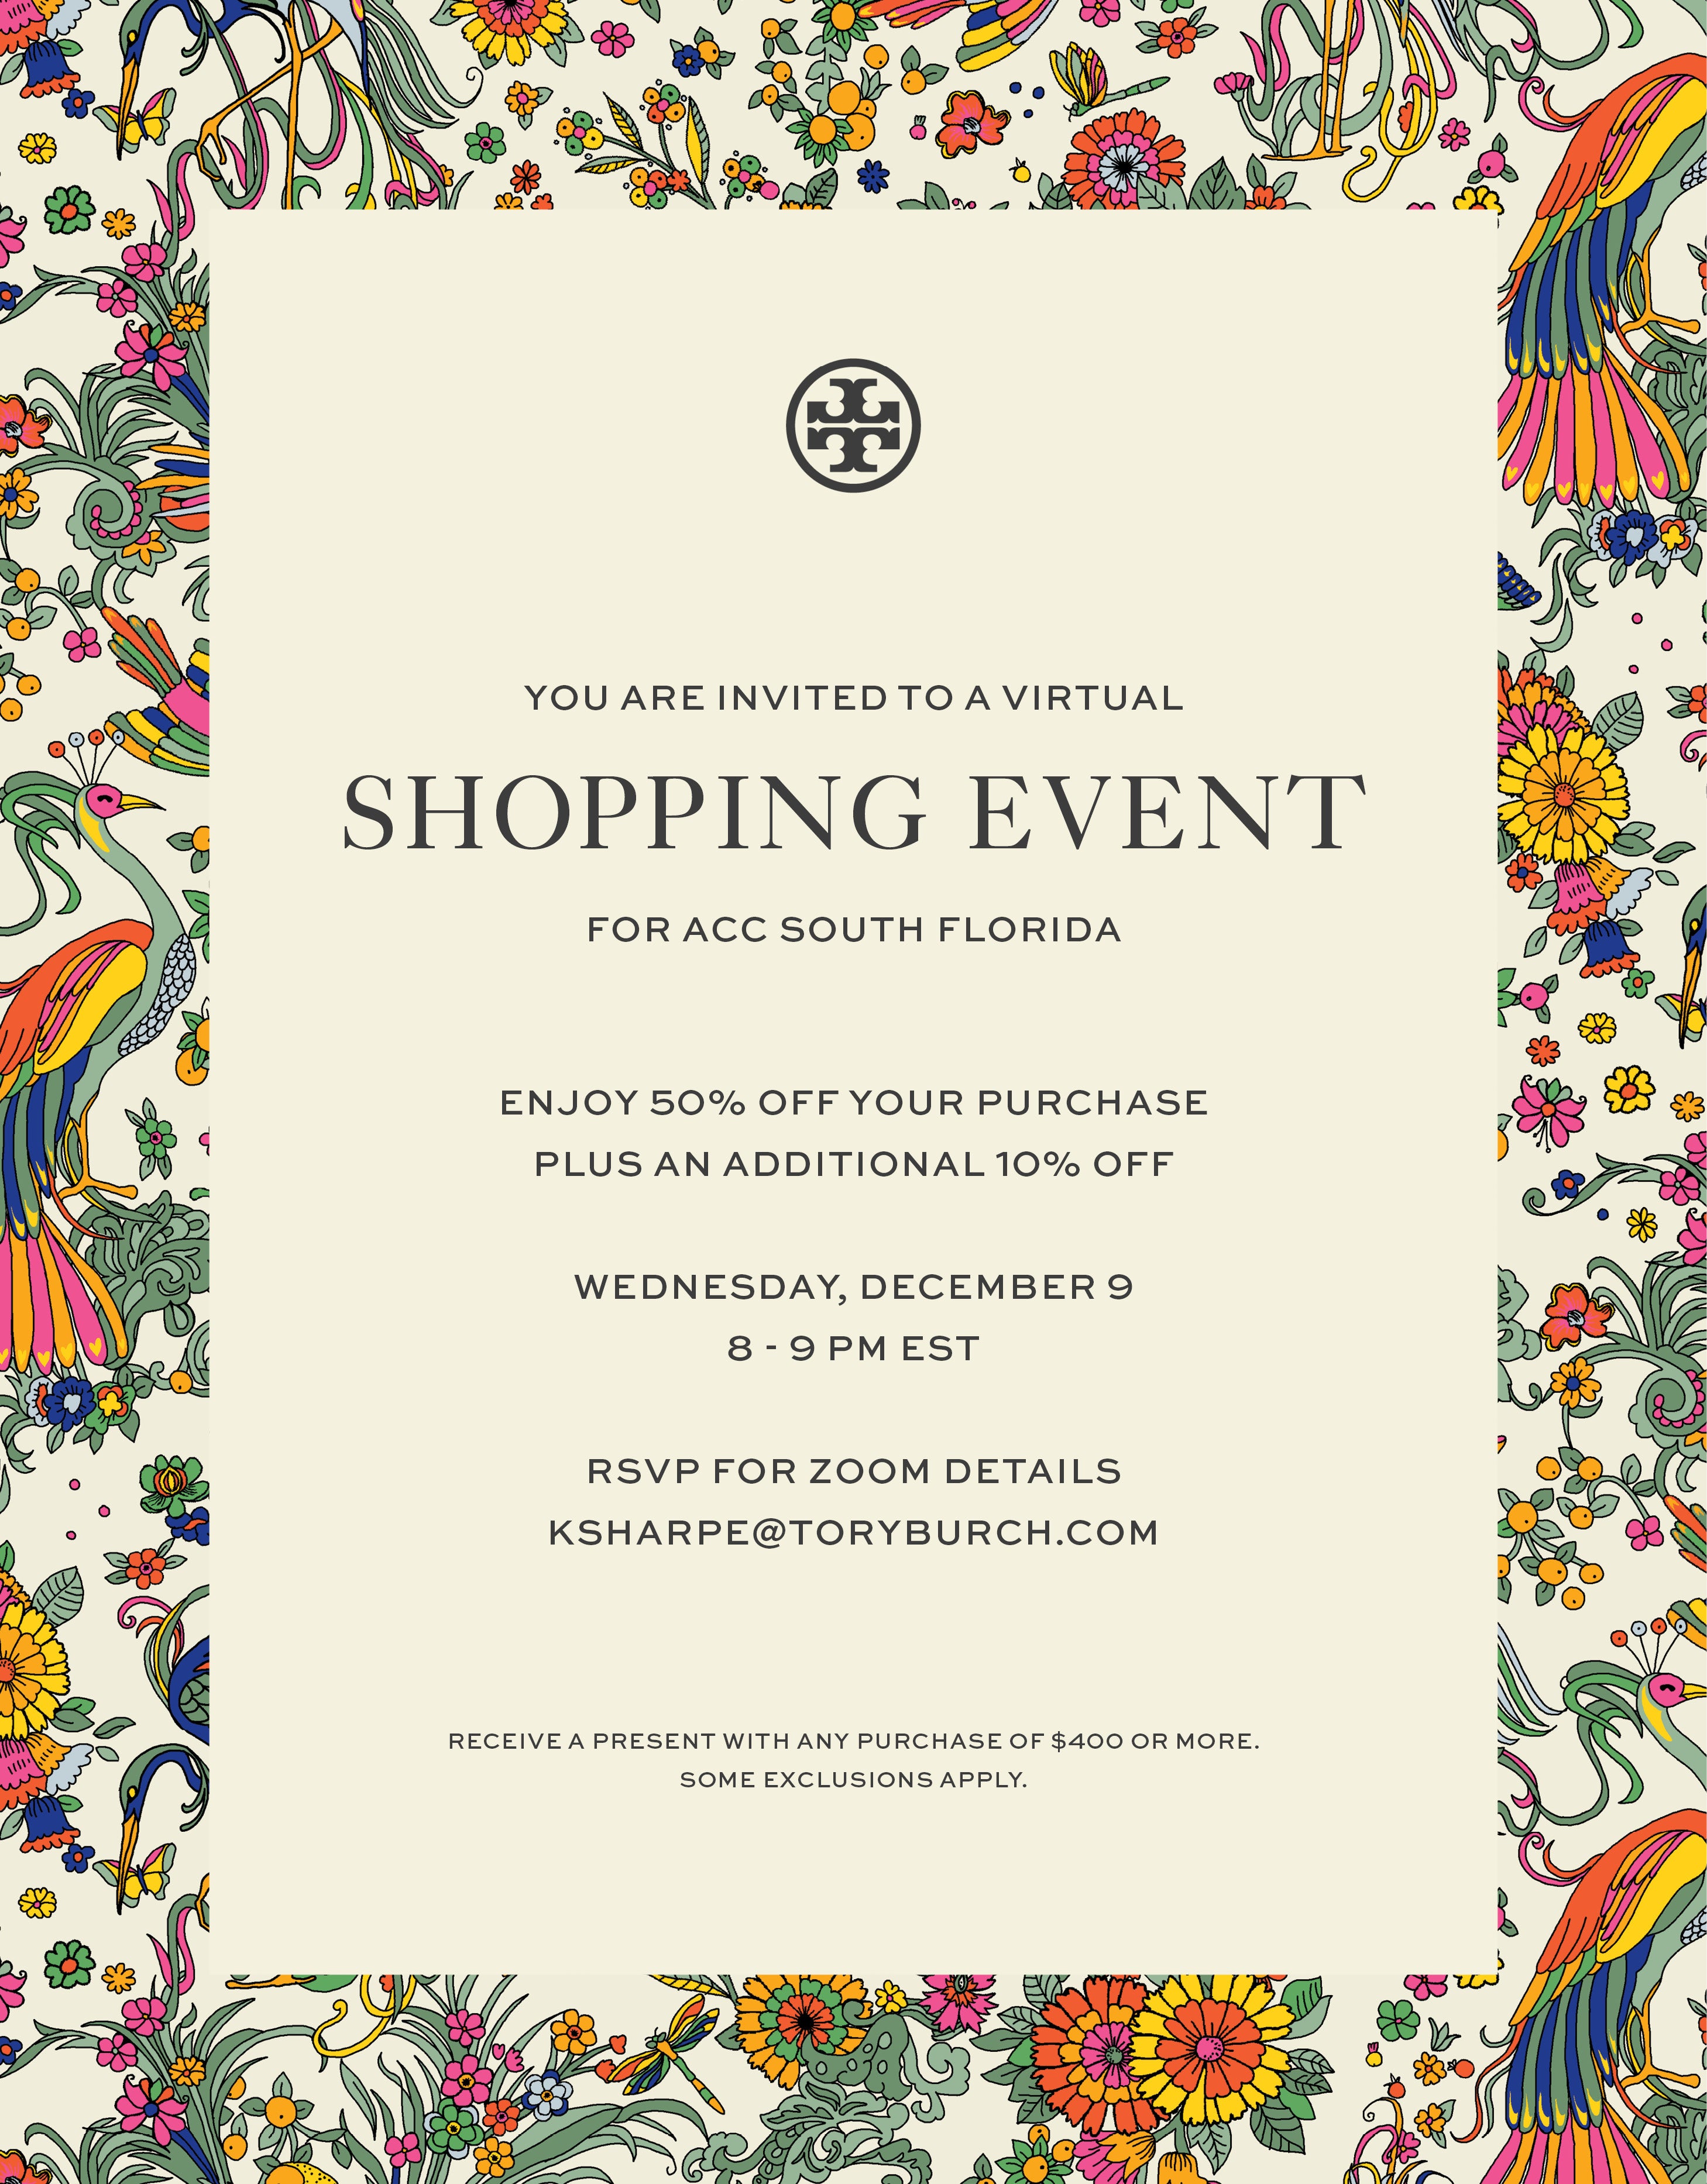 Virtual Holiday Shopping at Tory Burch | Association of Corporate Counsel  (ACC)